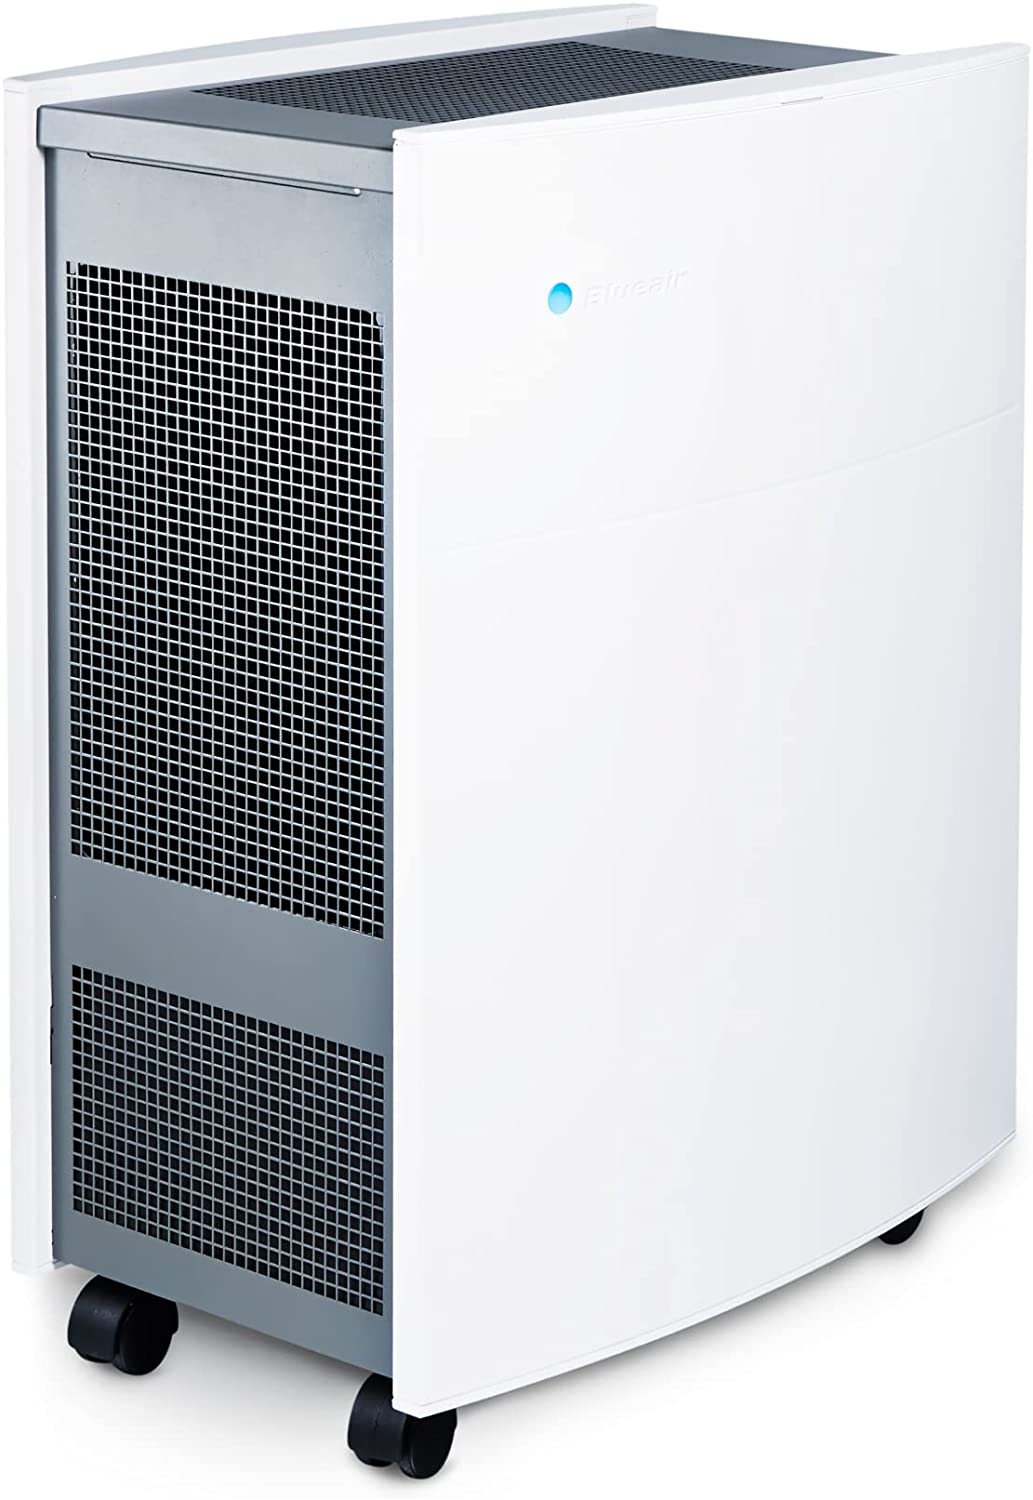 Blueair Classic 605 Air Purifier w/ HEPASilent Filtration $269.99 + Free Shipping w/ Prime @ Woot